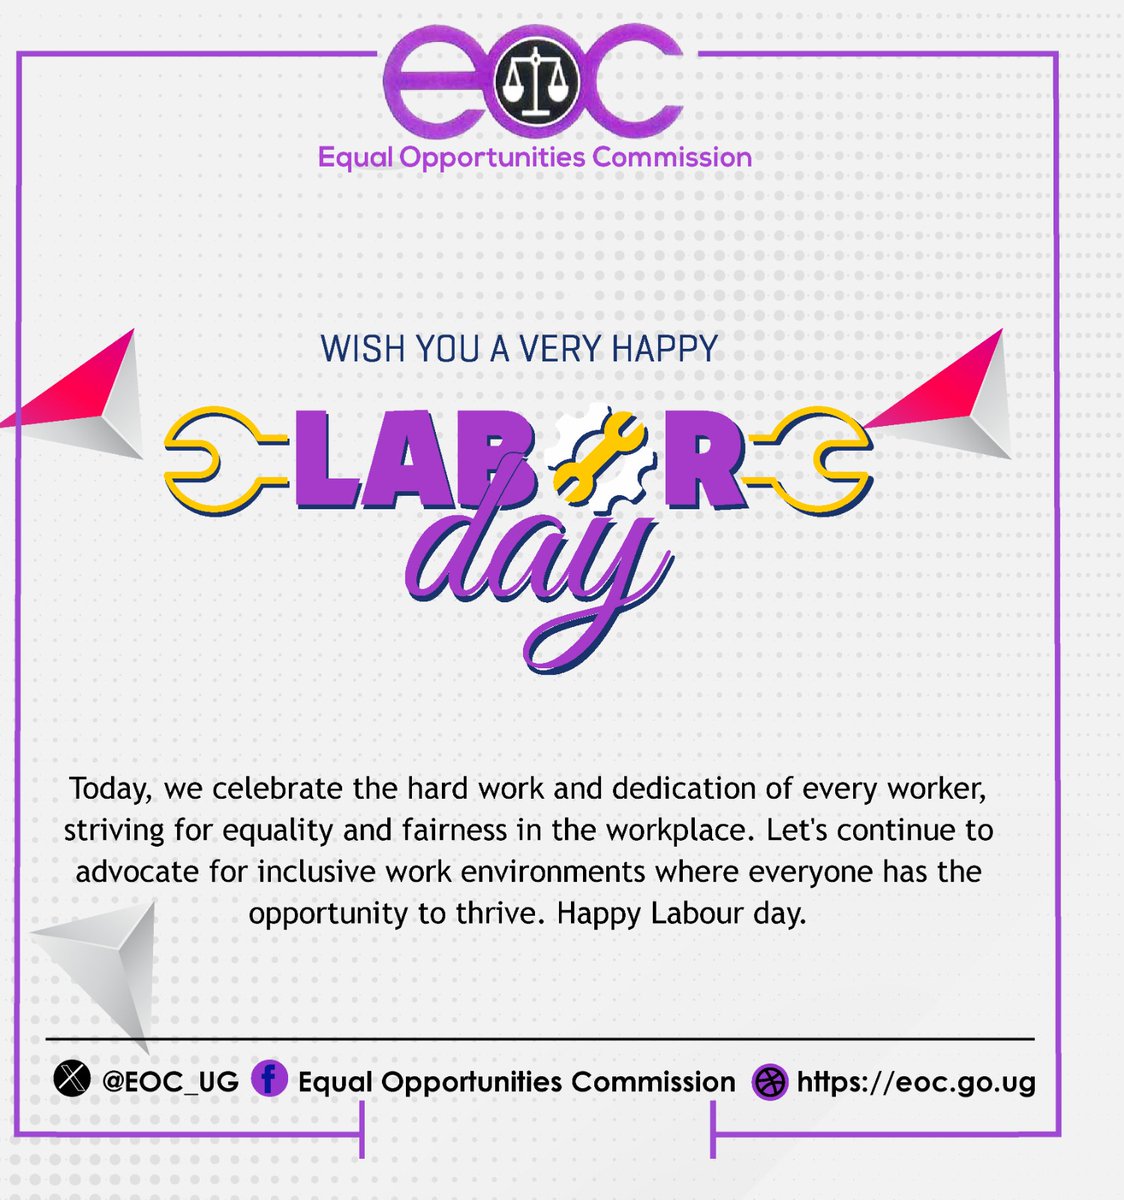 Today, we celebrate the hard work and dedication of every worker, striving for equality and fairness in the workplace. Let's continue to advocate for inclusive work environments where everyone has the opportunity to thrive. Happy Labour day.